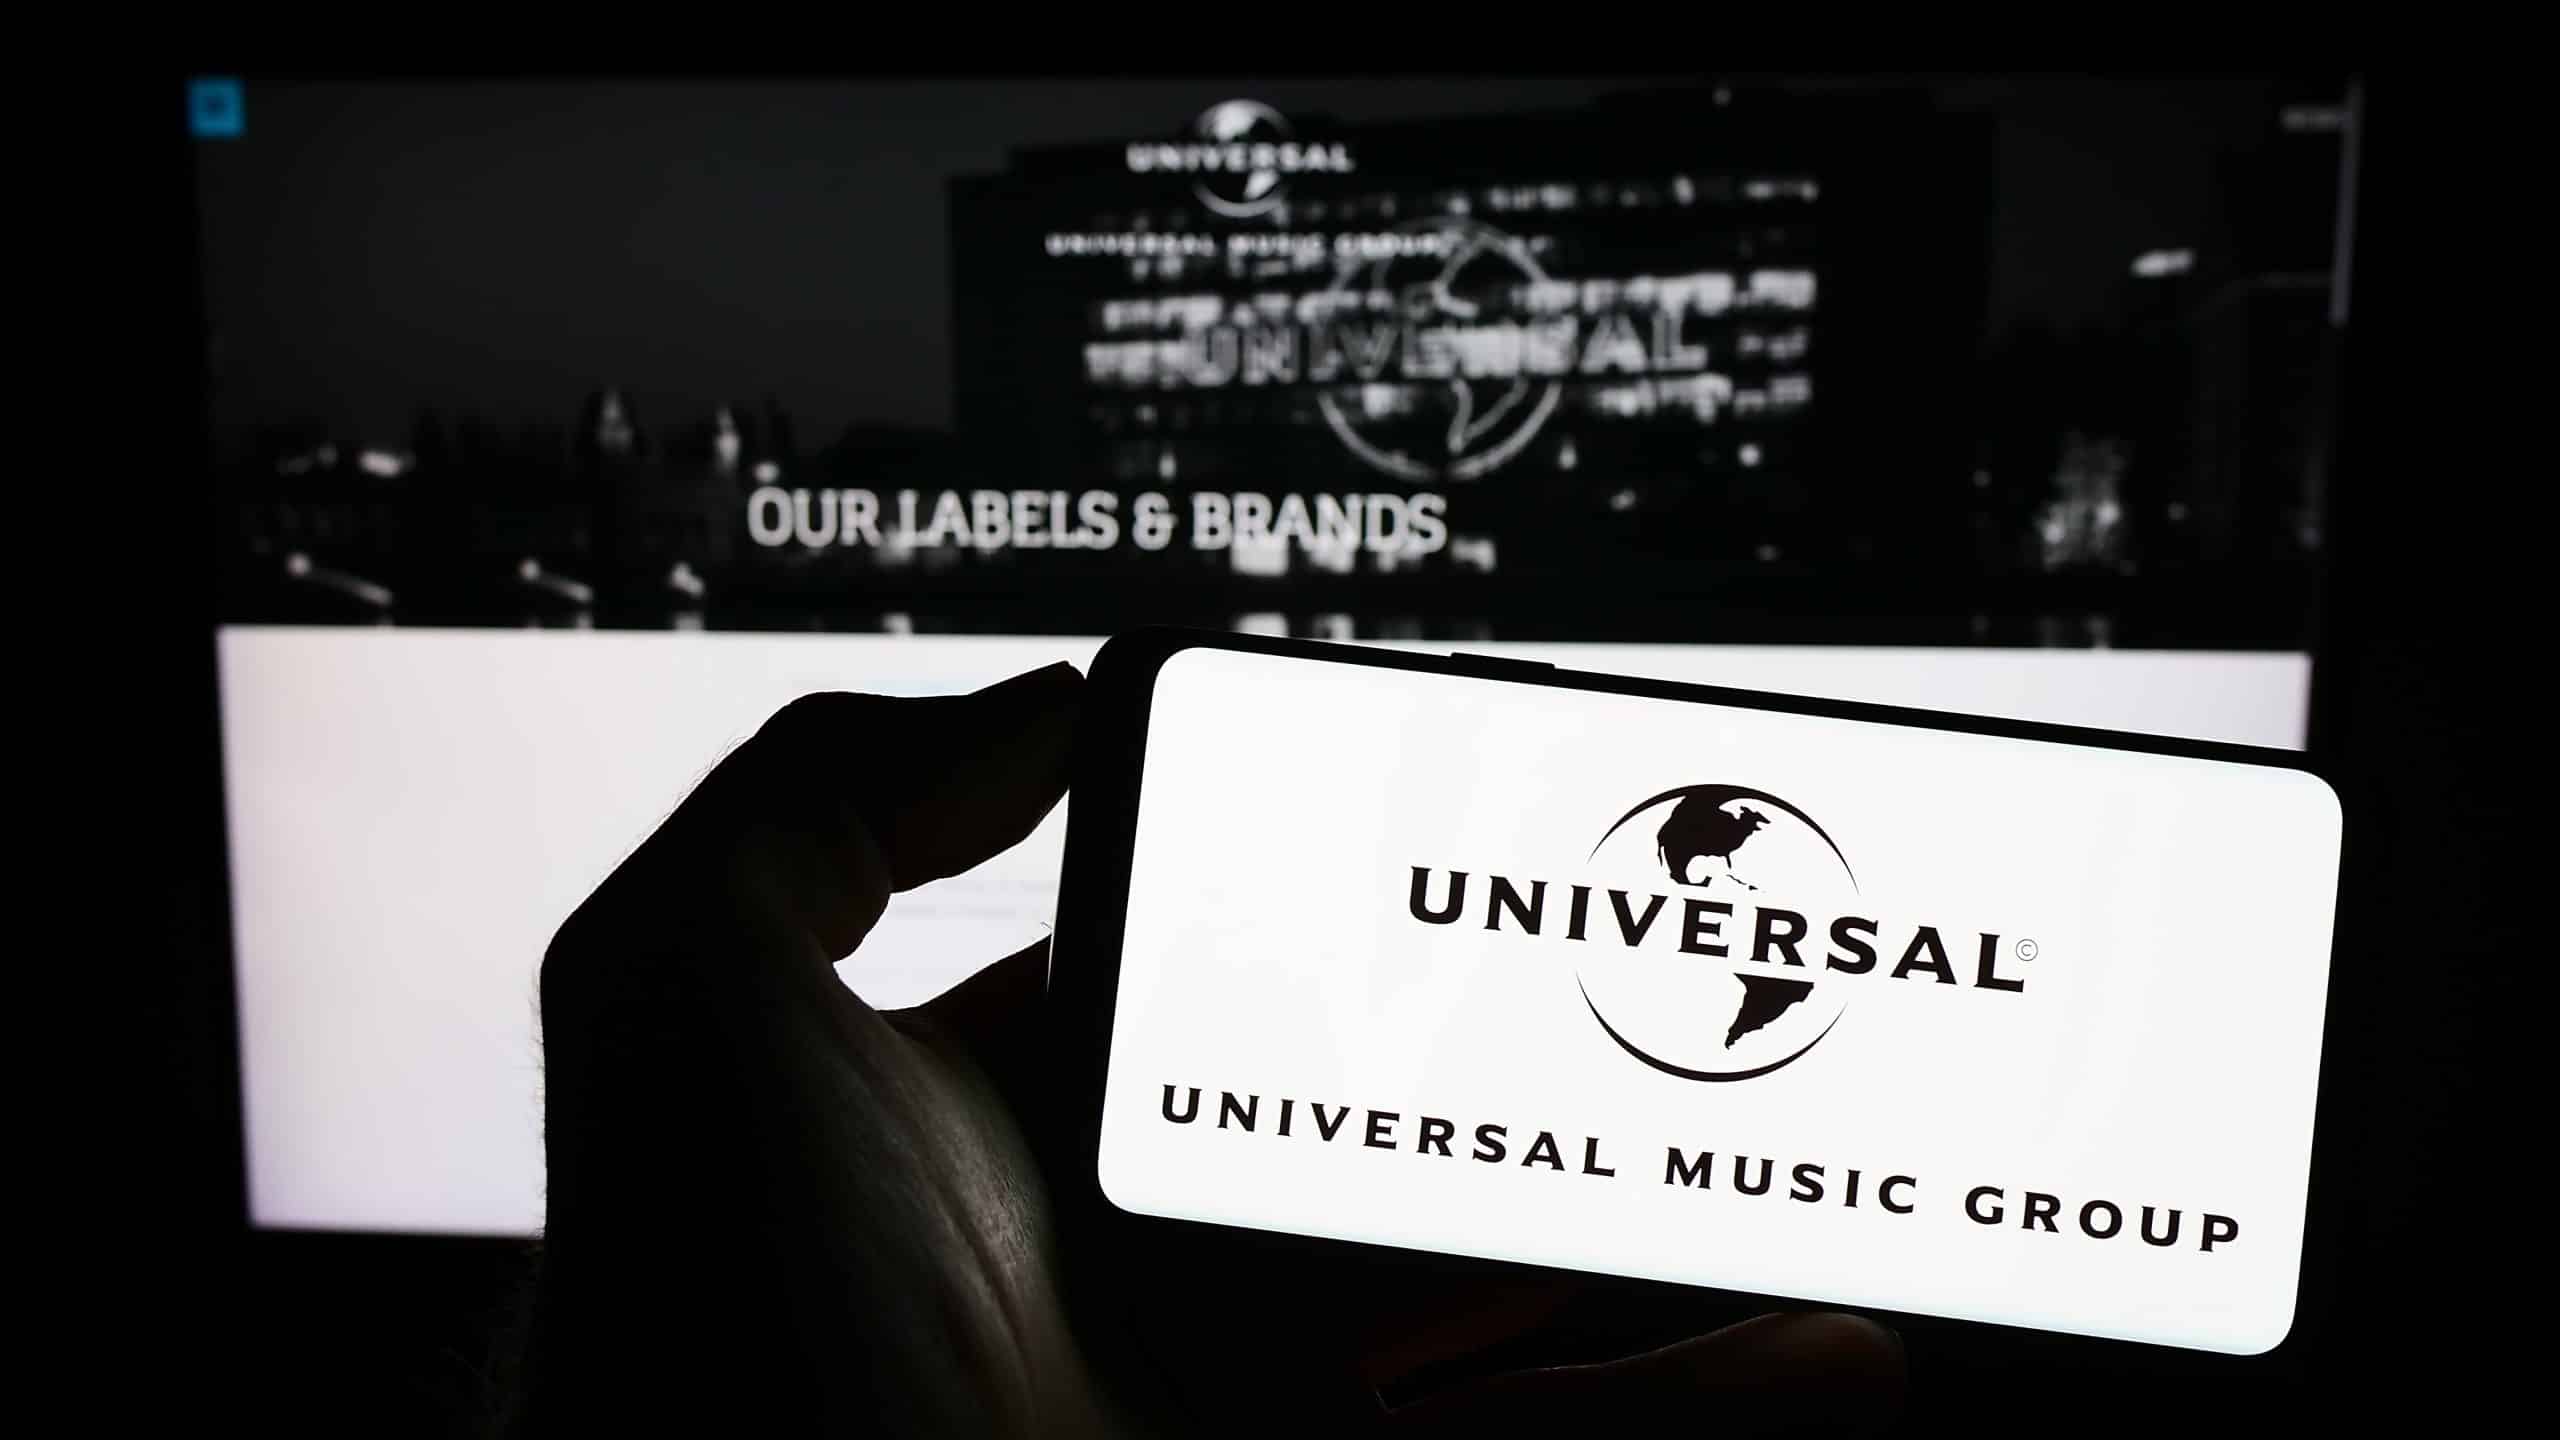 universal music group logo on a phone